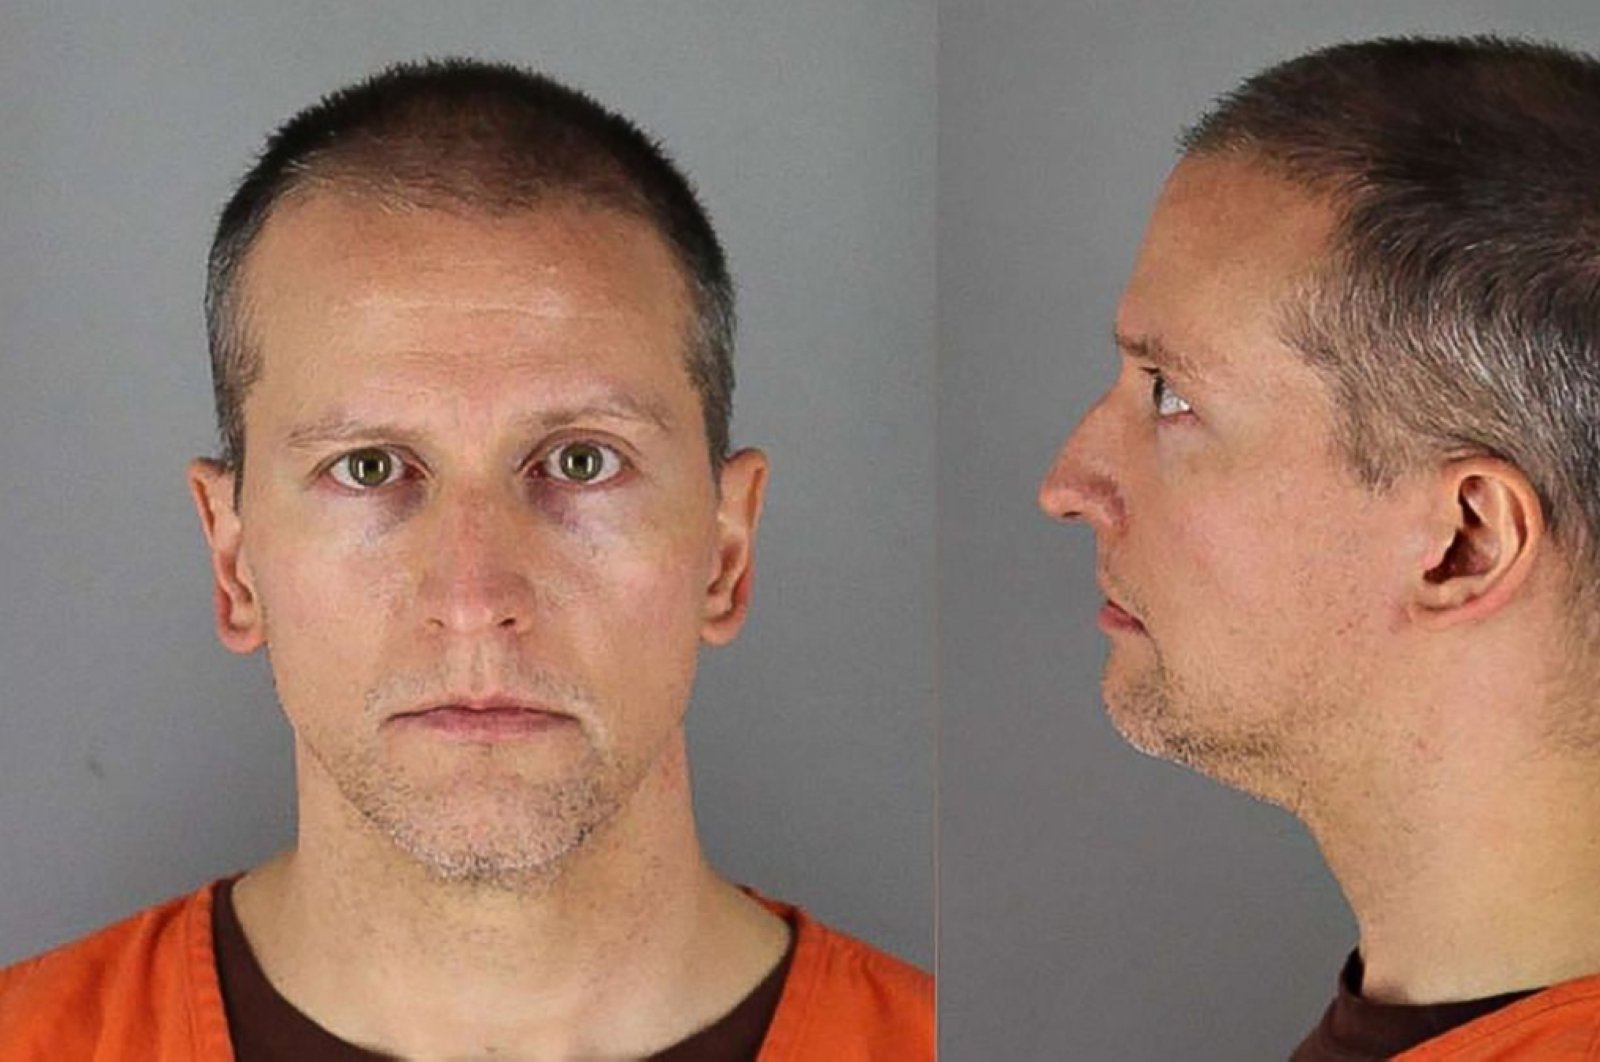 This file handout photo shows Derek Chauvin booking photos face and profile, May 31, 2020. (AFP)